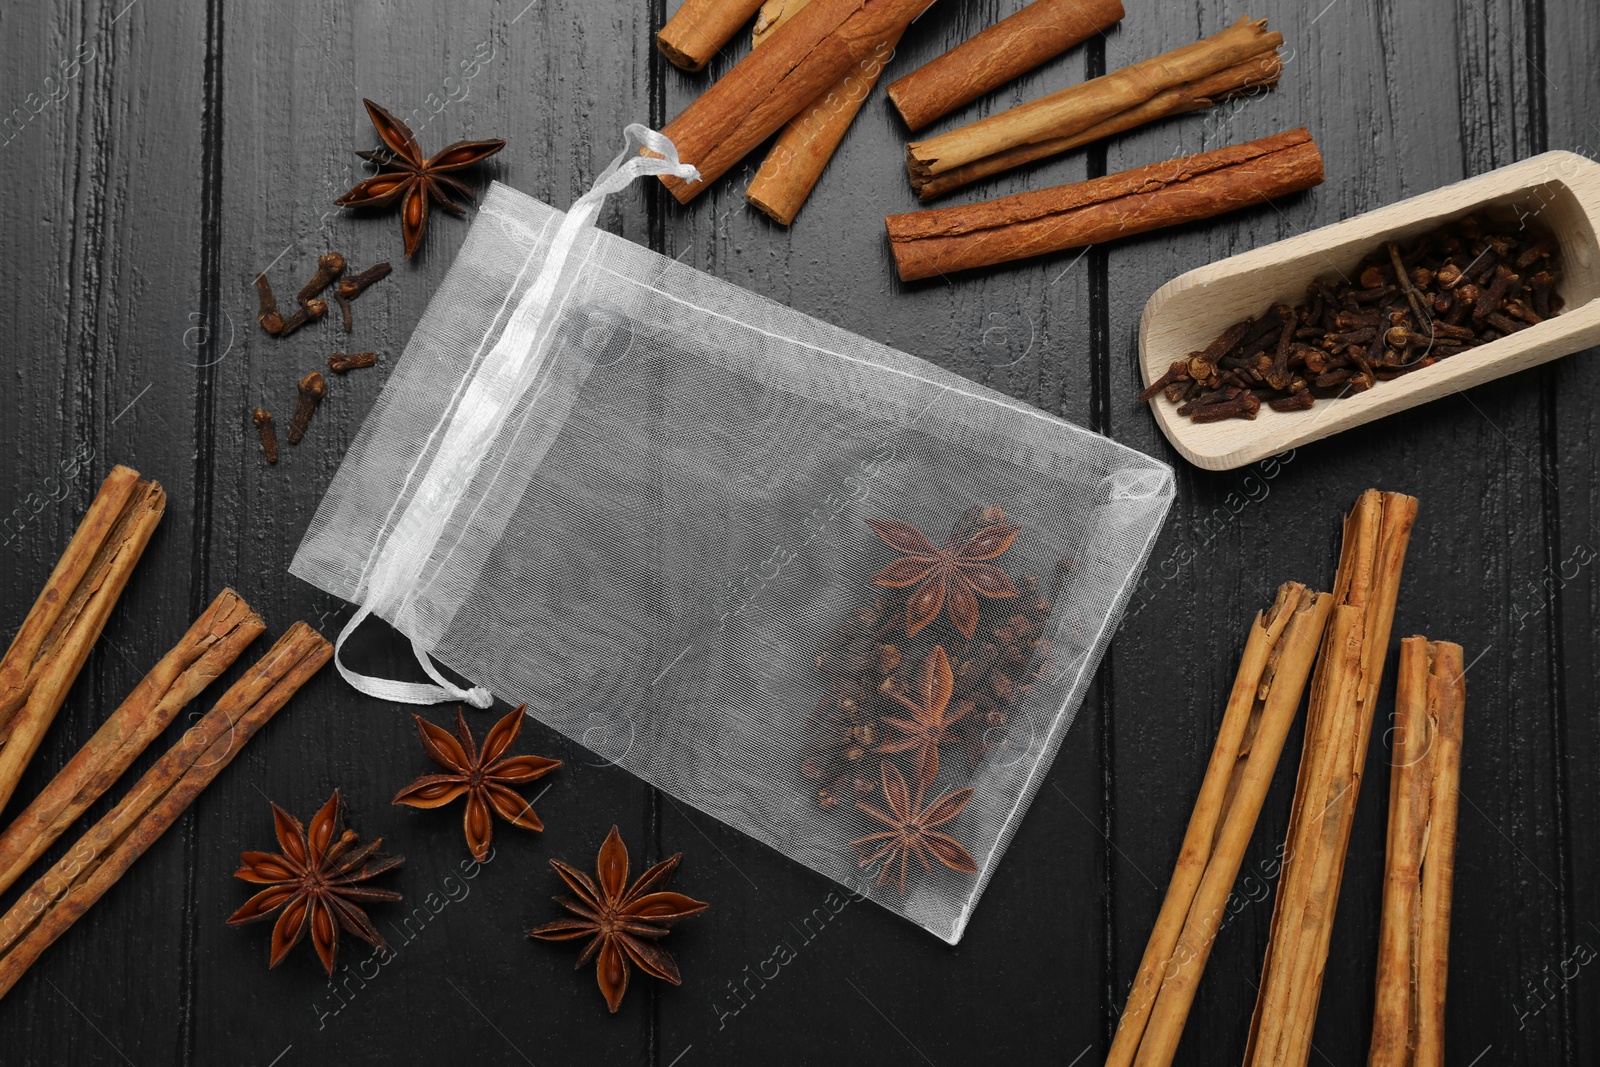 Photo of Scented sachet with cinnamon sticks and anise stars on wooden table, flat lay